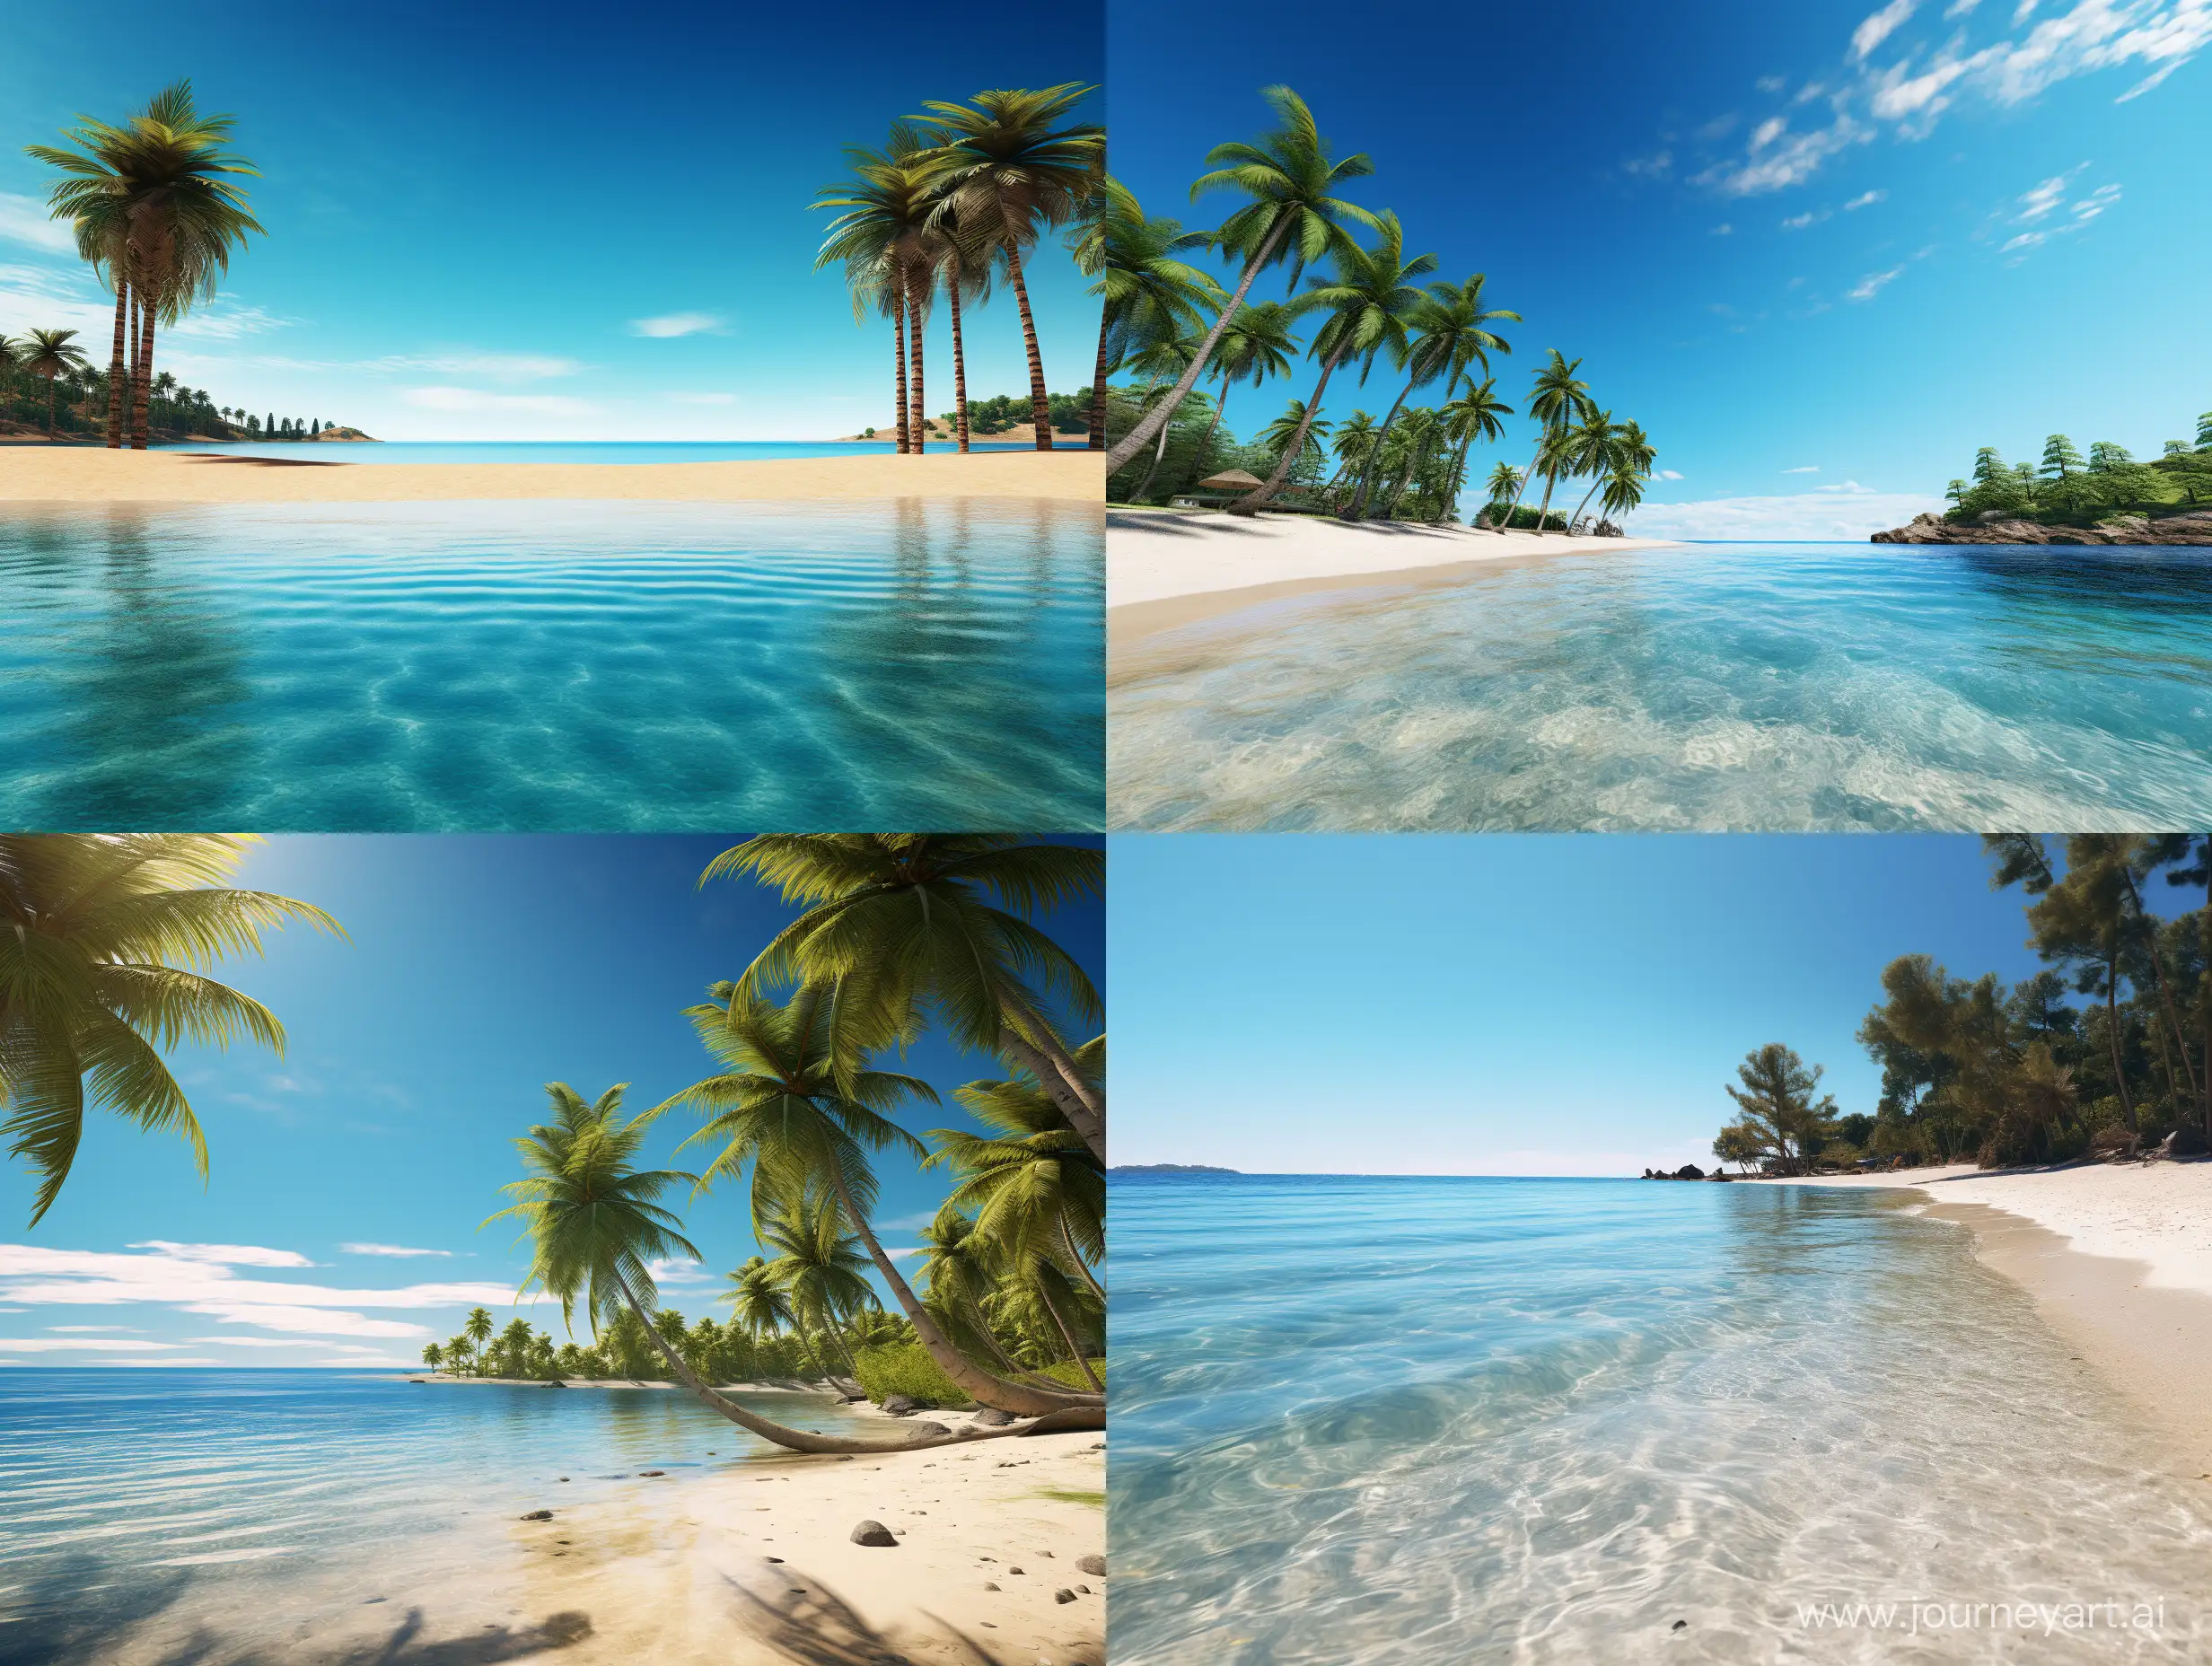 beaches, sun, blue sky and turquoise water, pine trees, palm trees, beach. professional photography, beautiful, symmetry, 5d, realistic,1024k, high resolution, high detail, CGI, hyperrealism, f/16, 1/100 s, 4k, aesthetically pleasing, f/2.8, 1/250 s, 30 mm lens, ISO 100.